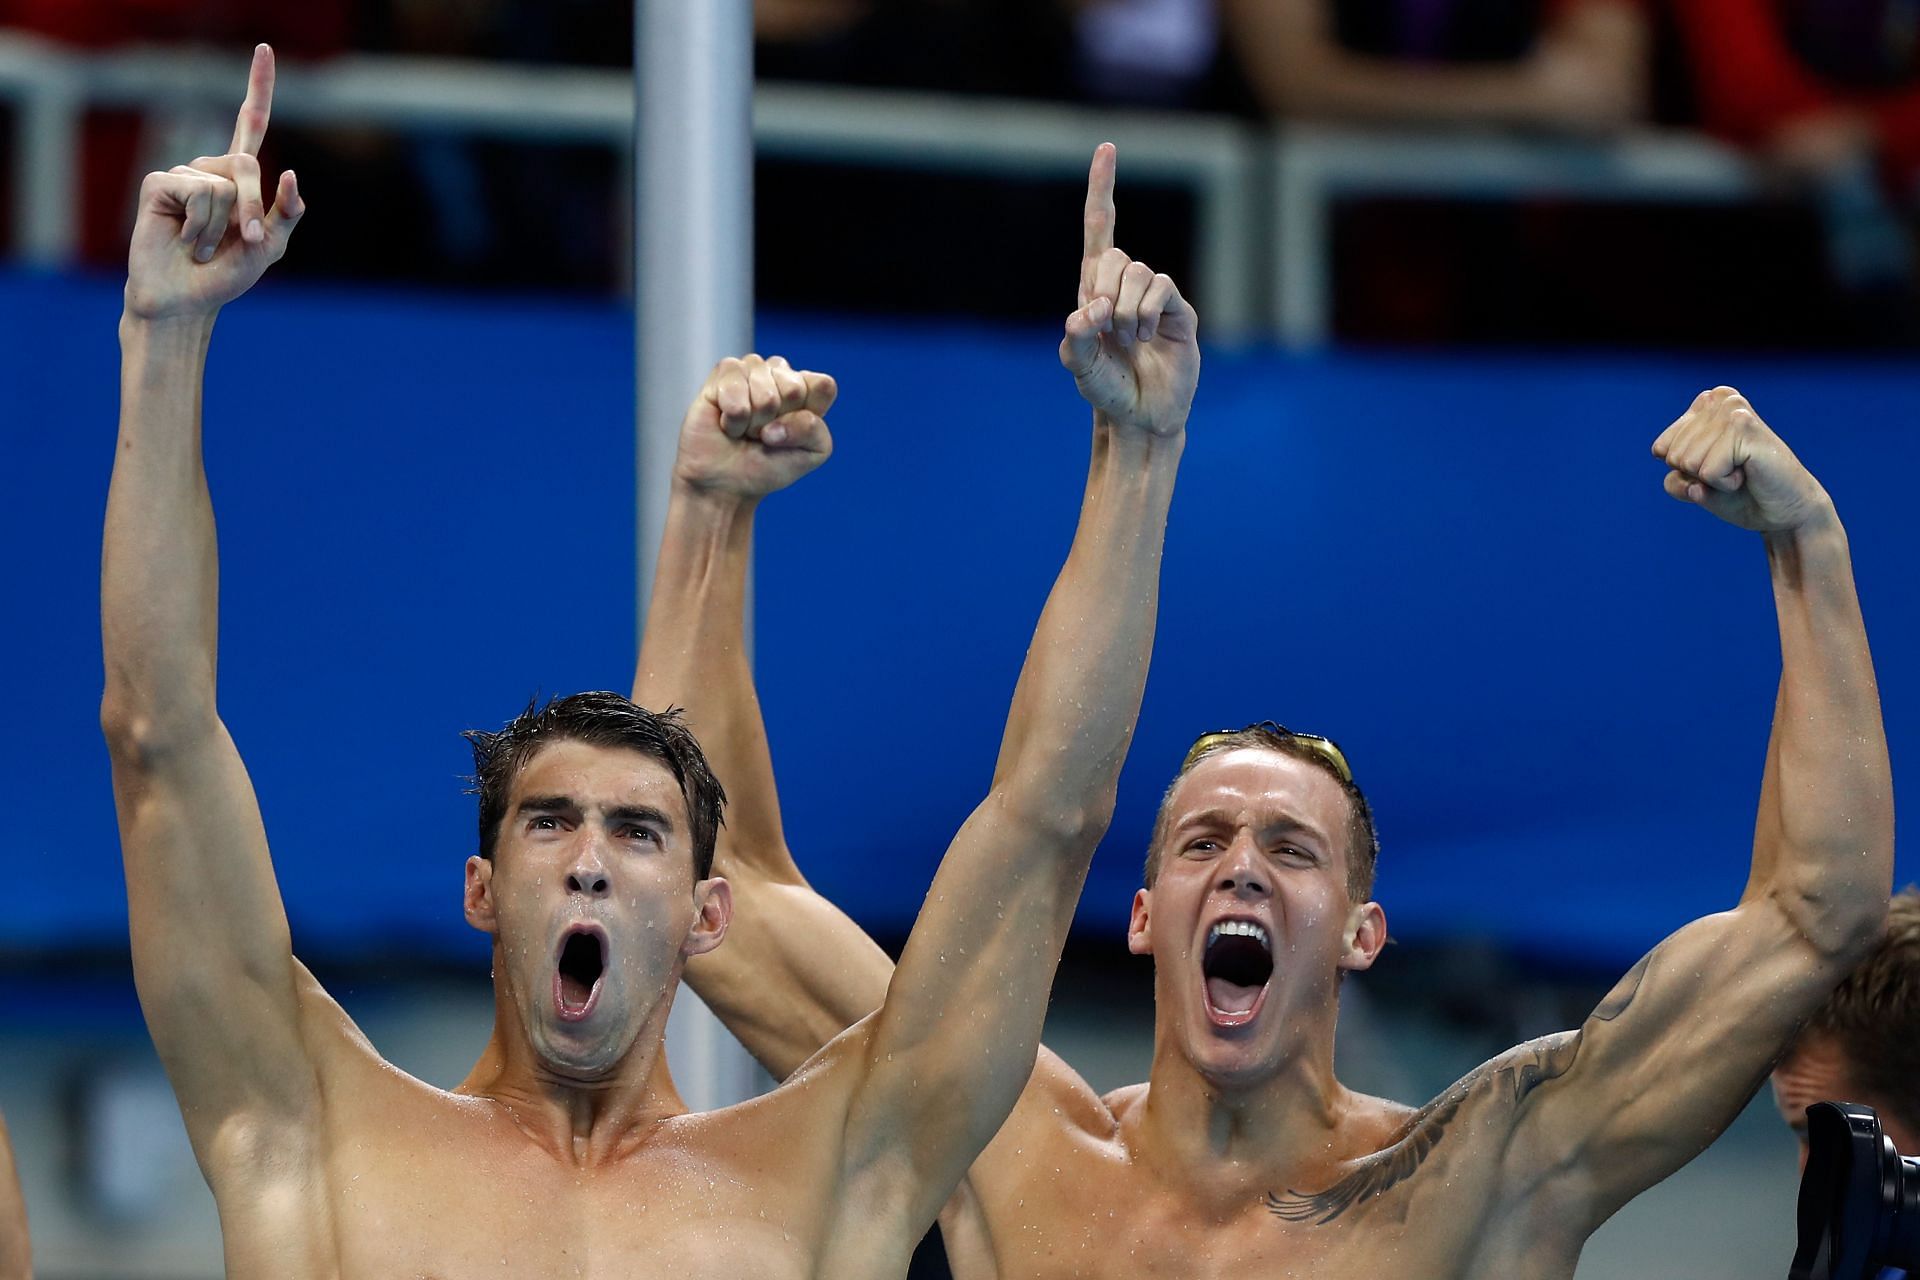 Caeleb Dressel and Michael Phelps at the Olympics